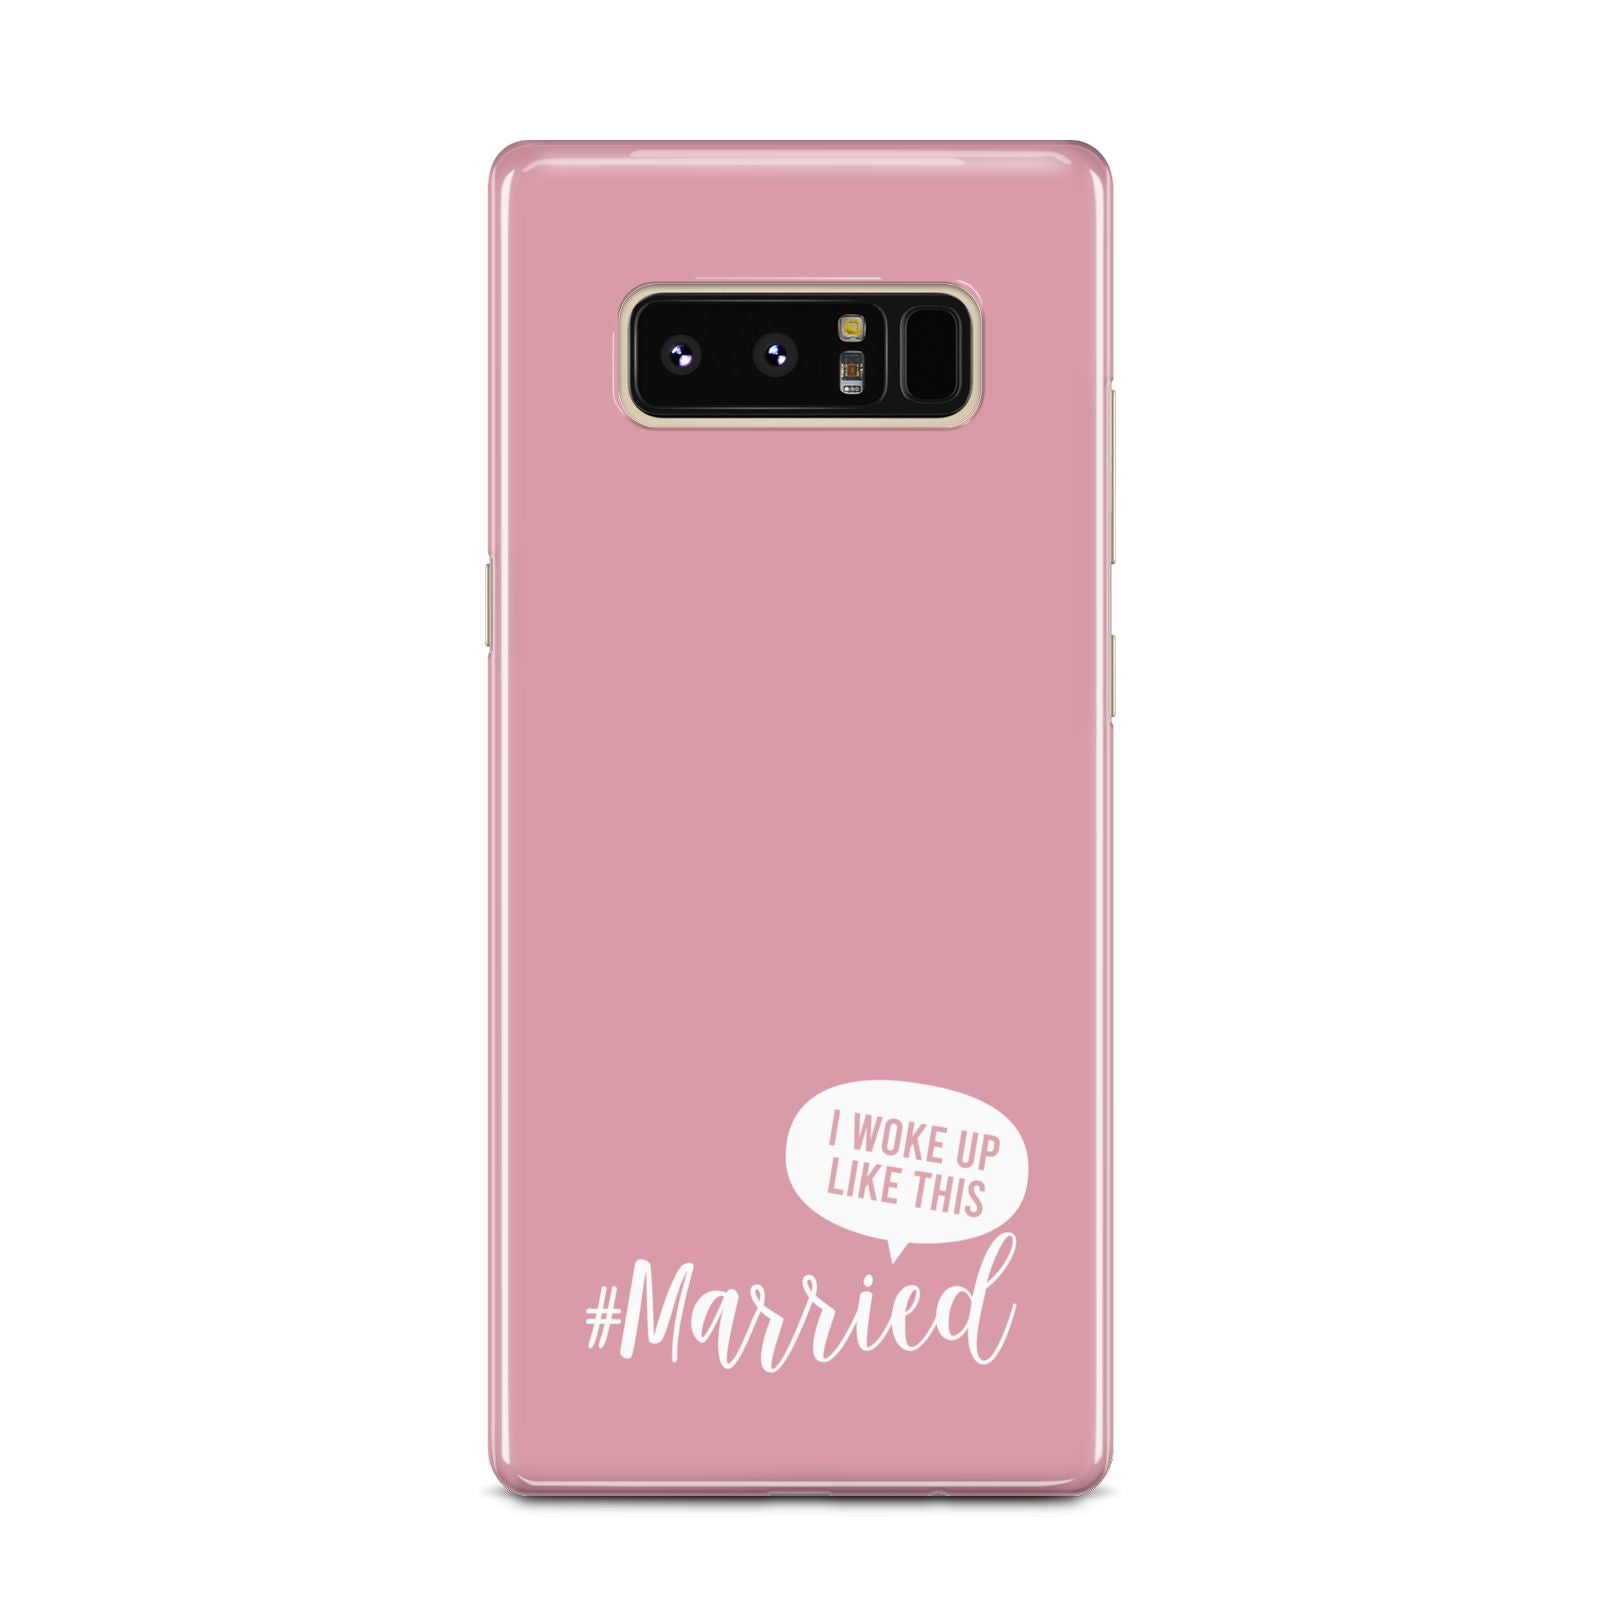 I Woke Up Like This Married Samsung Galaxy Note 8 Case